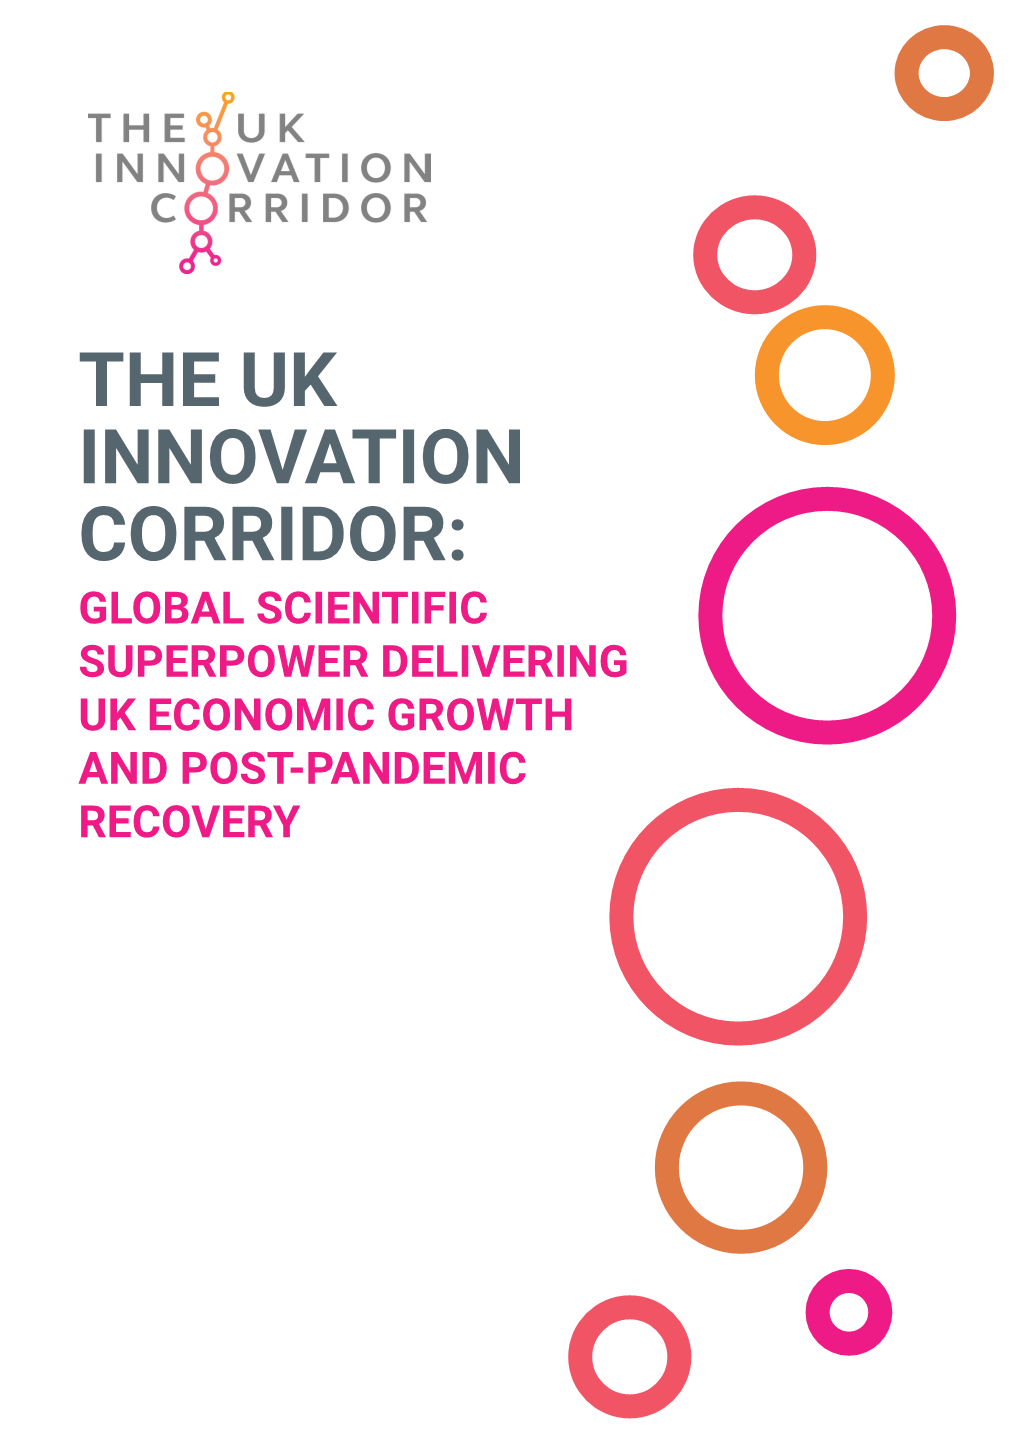 A GLOBAL SCIENTIFIC CONTEXT the UK Innovation